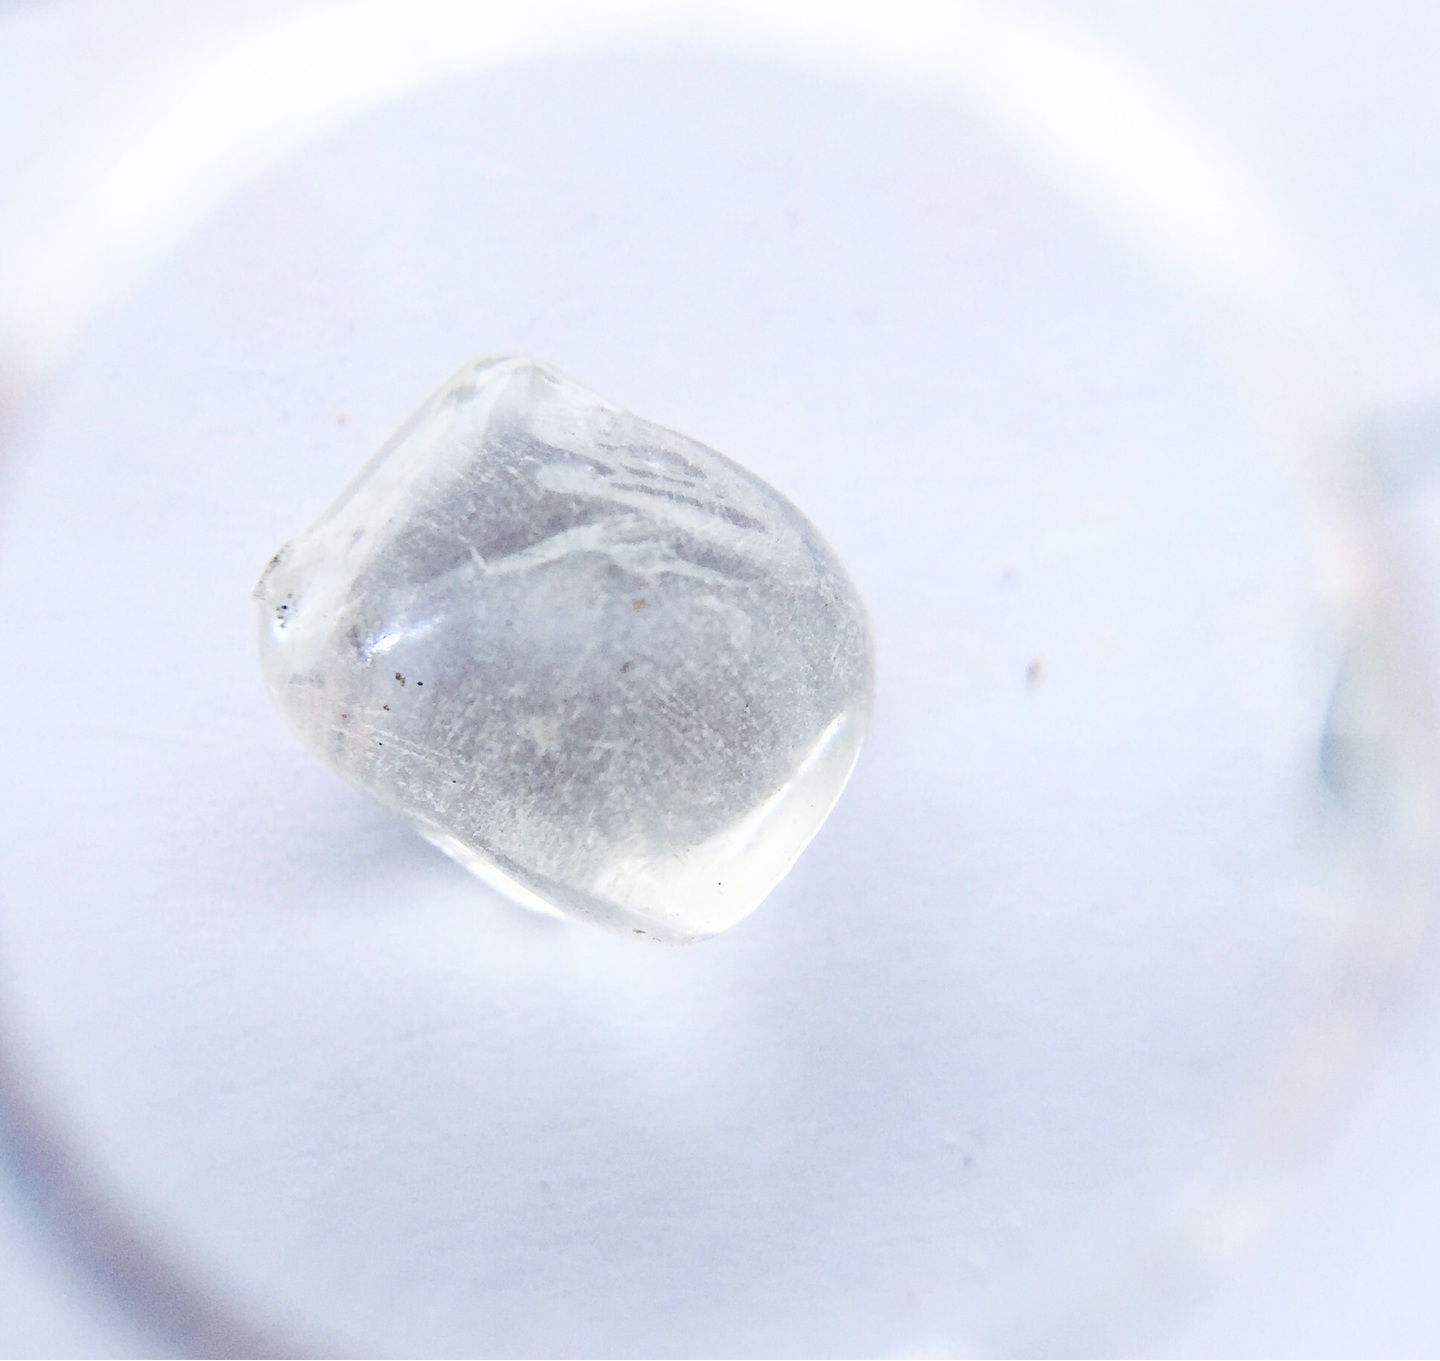 Does a rough diamond found in the dirt look like a crystal? - Quora